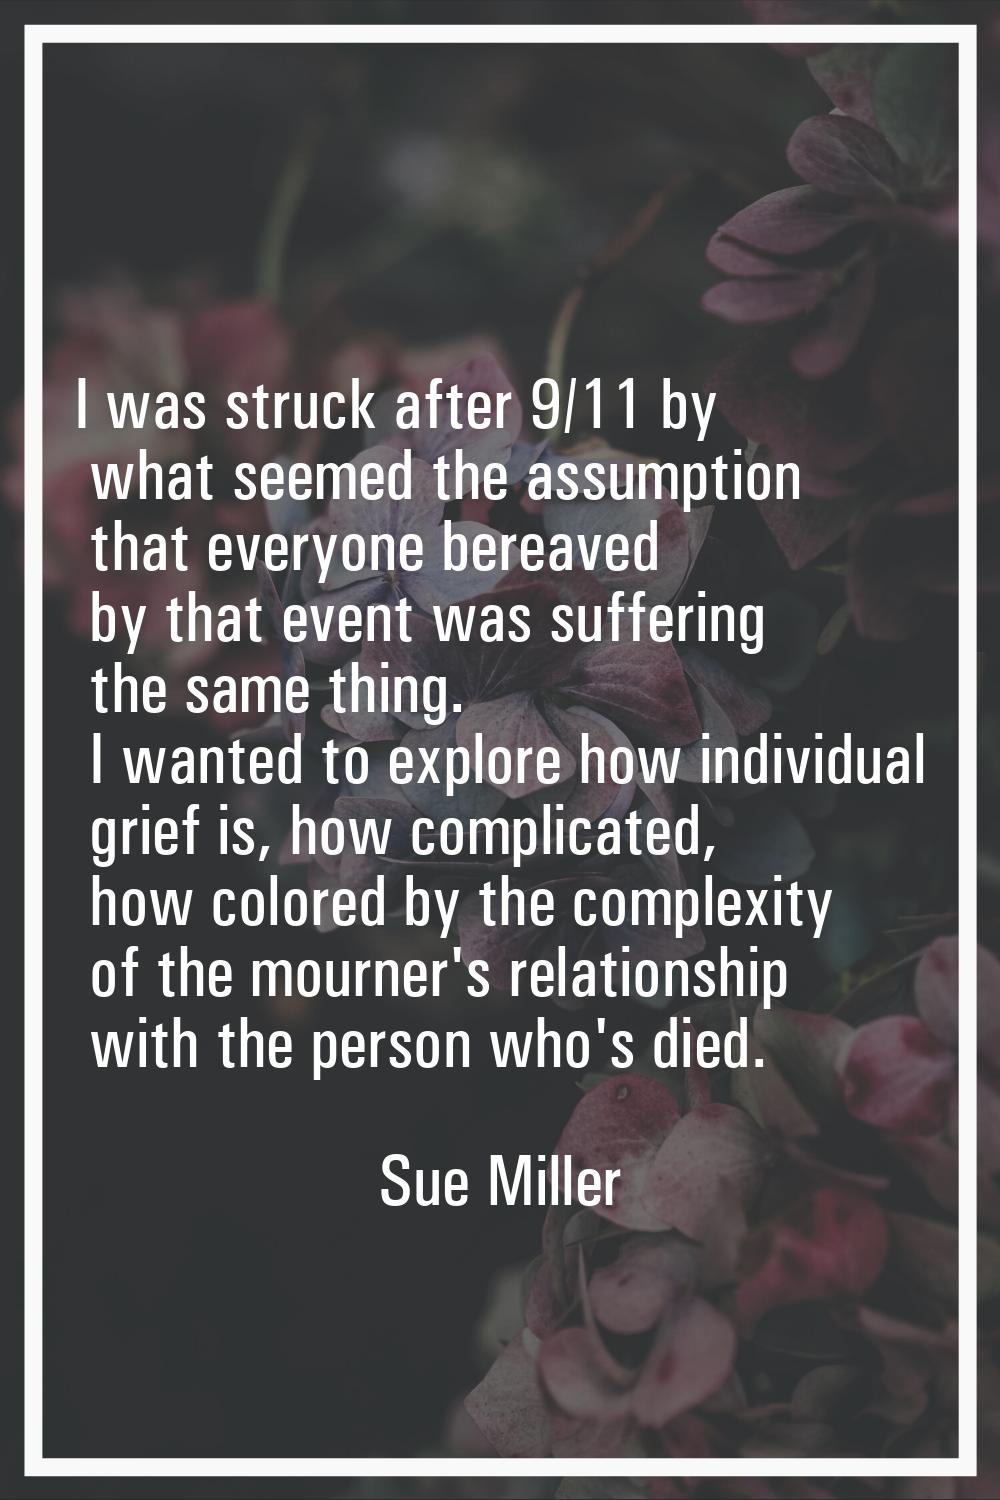 I was struck after 9/11 by what seemed the assumption that everyone bereaved by that event was suff